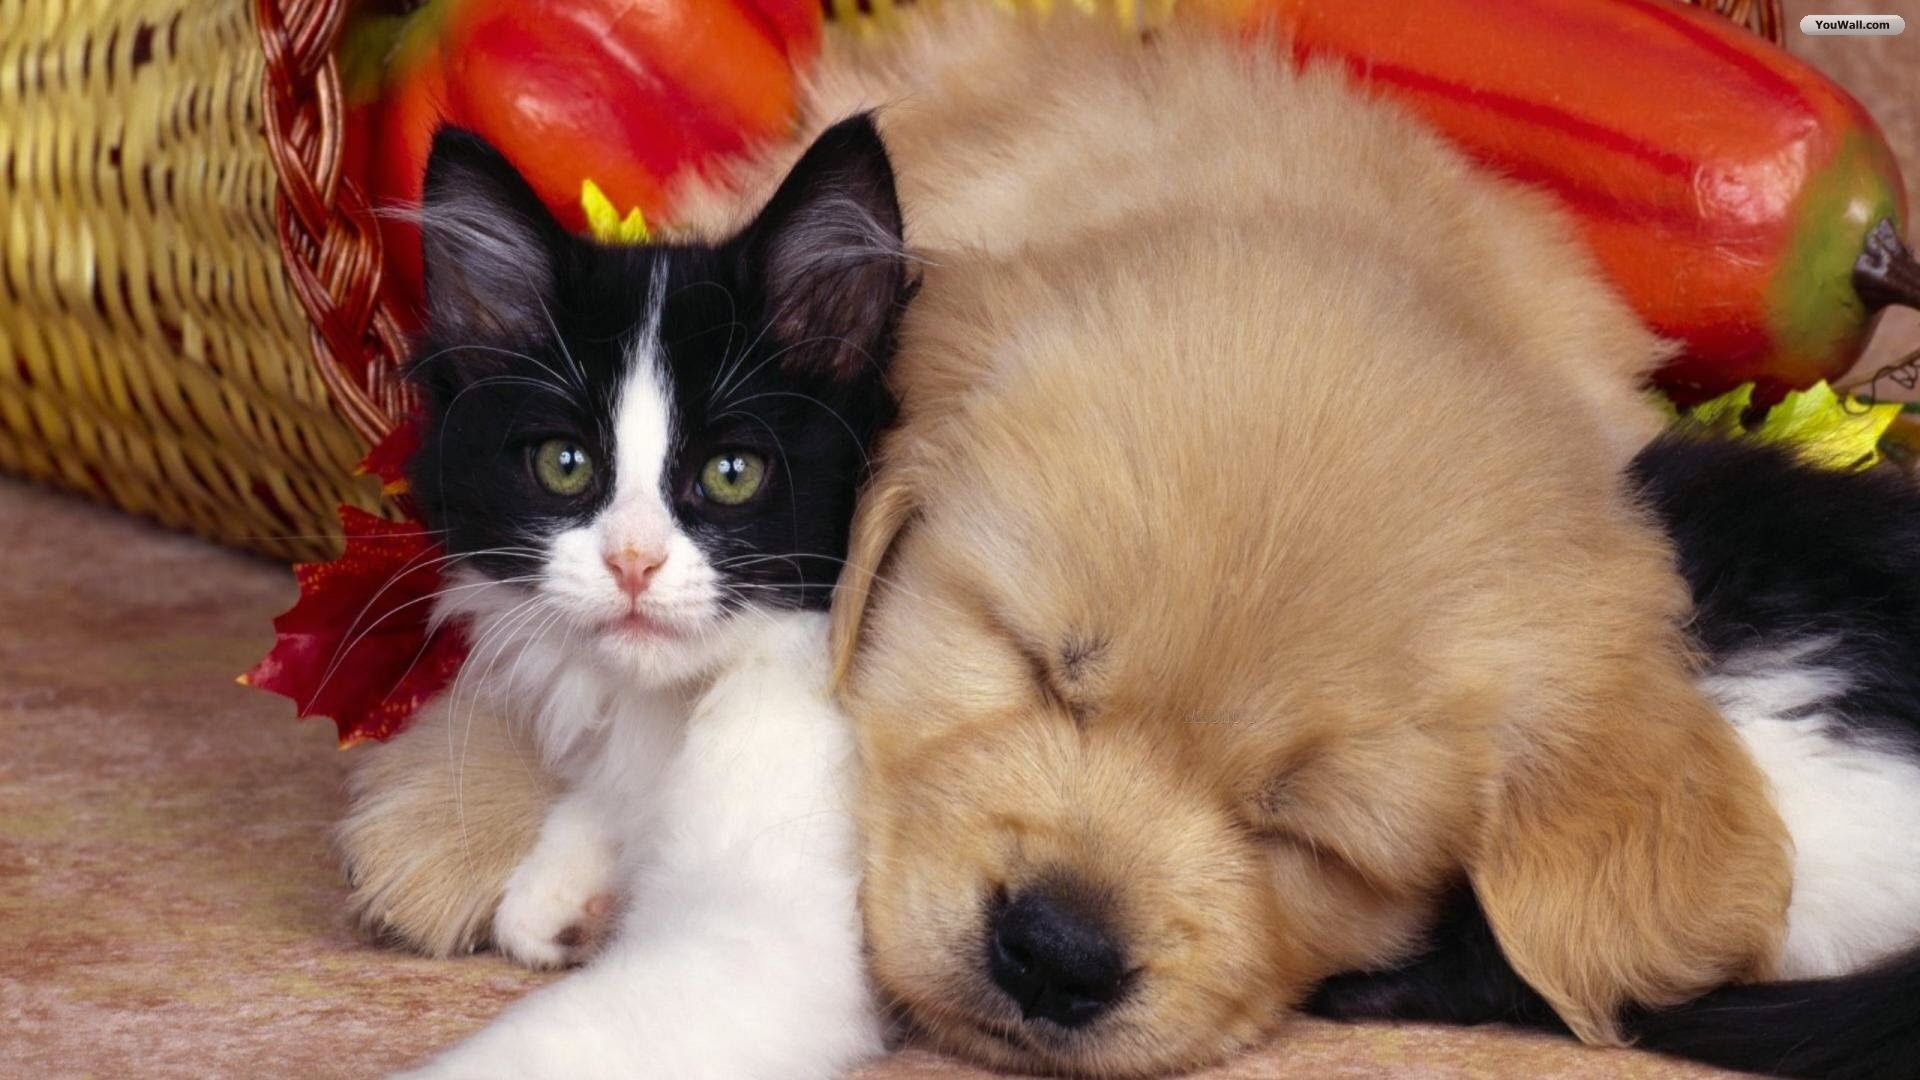 Dog and Cat Wallpapers